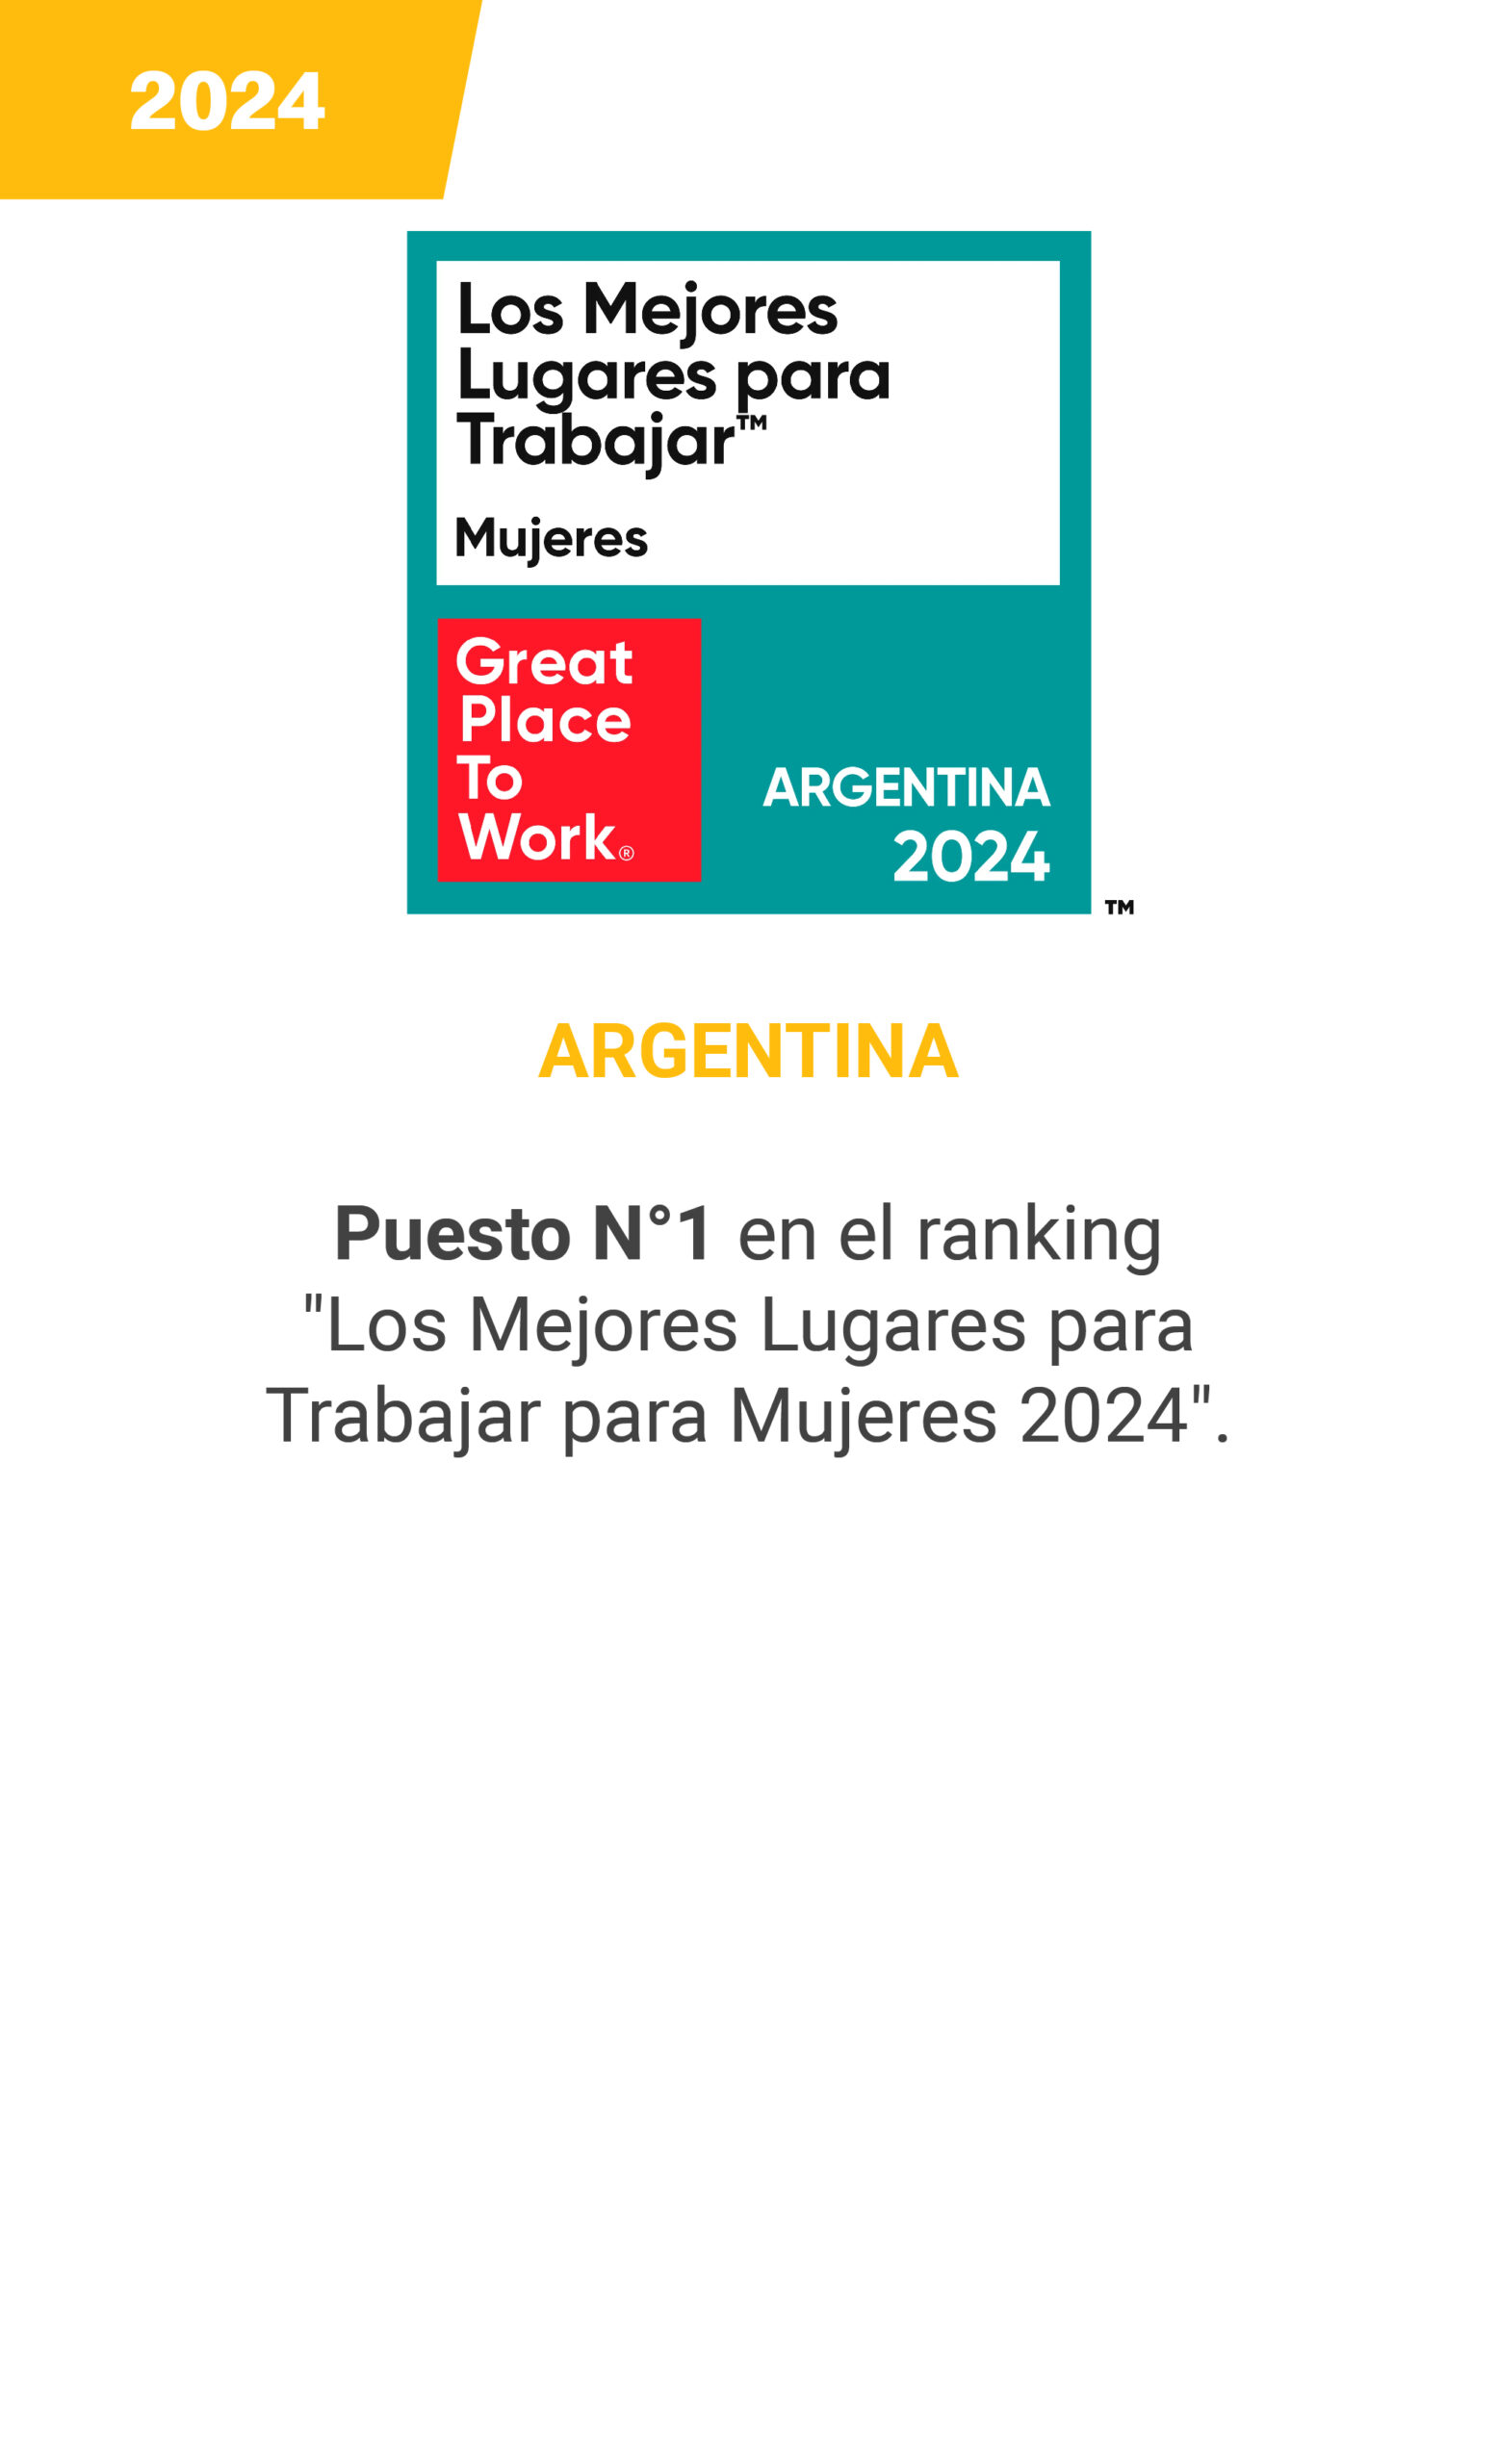 GPTW - Mujeres - Argentina 2024 - mobile